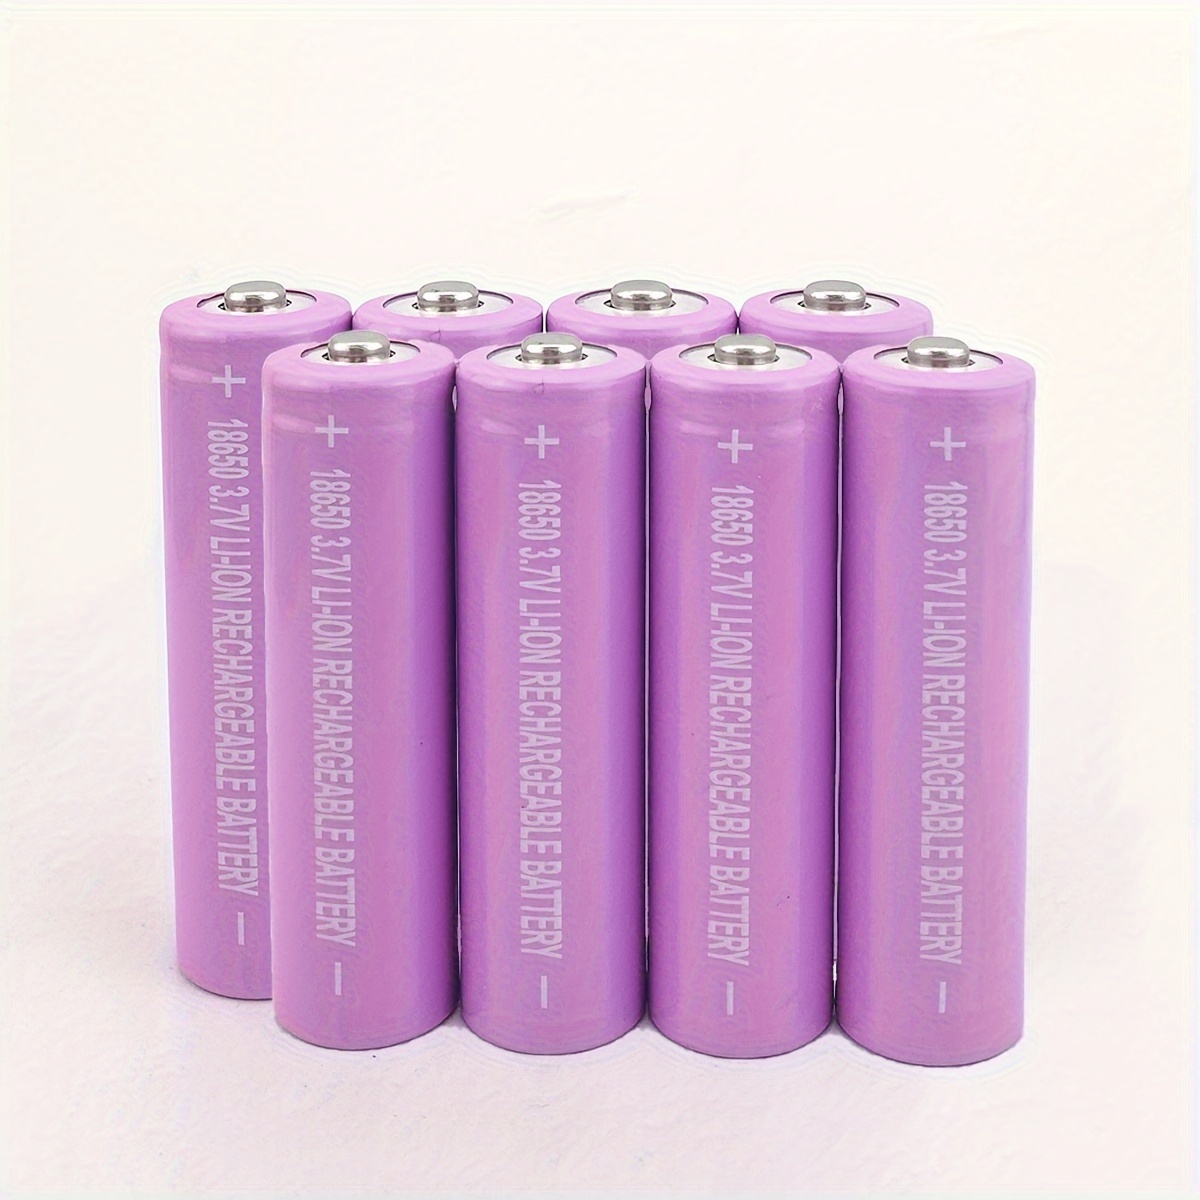 4pcs/6pcs/8pcs/10pcs 18650 3.7V Rechargeable Battery, 1500mAh High Capacity  Pointed Top Rechargeable High-power Lithium-ion Battery, Suitable For Flas